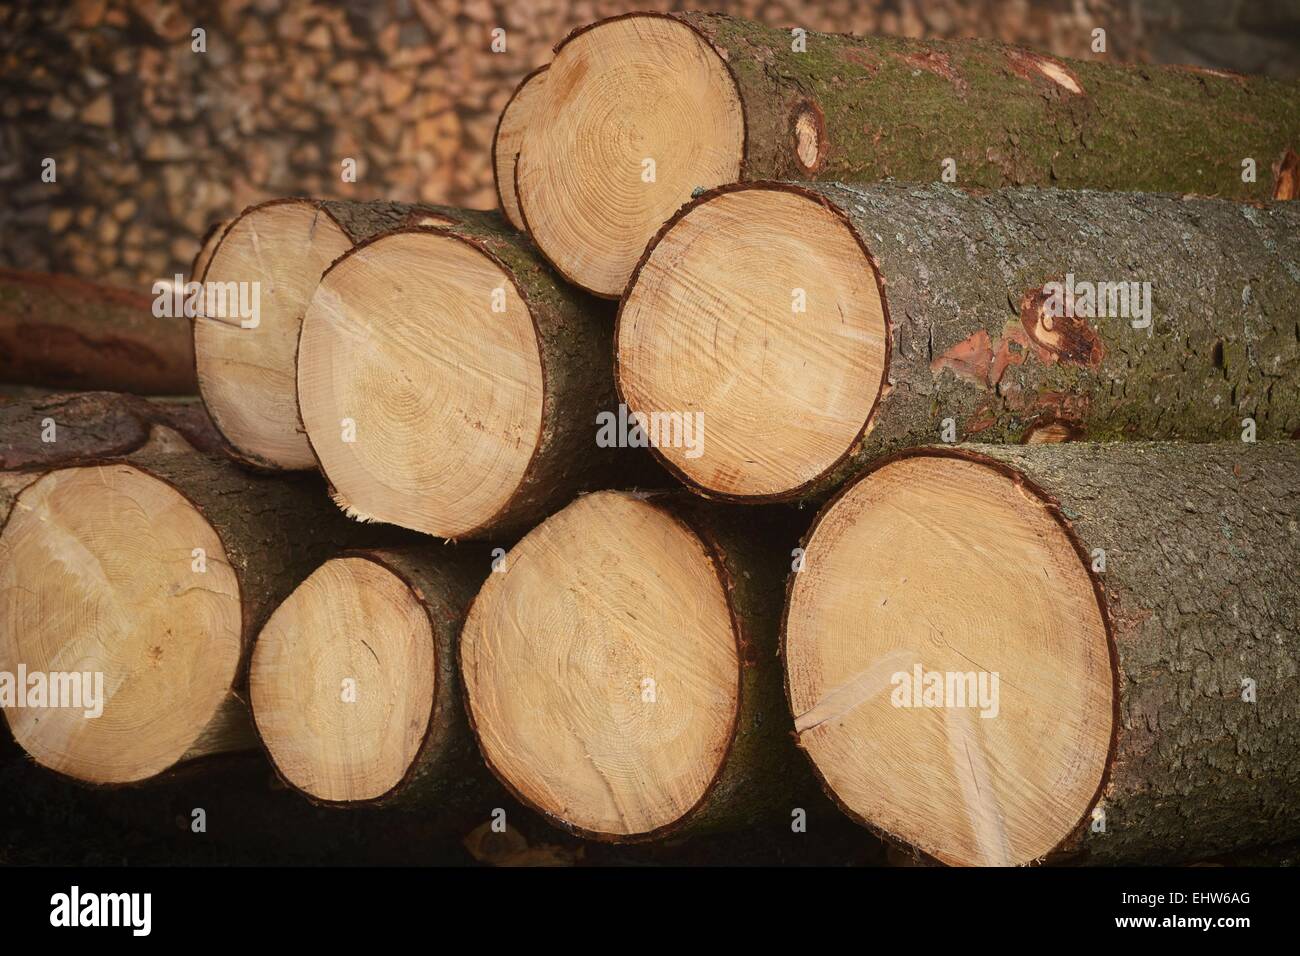 Supplier of energy wood - logs Stock Photo